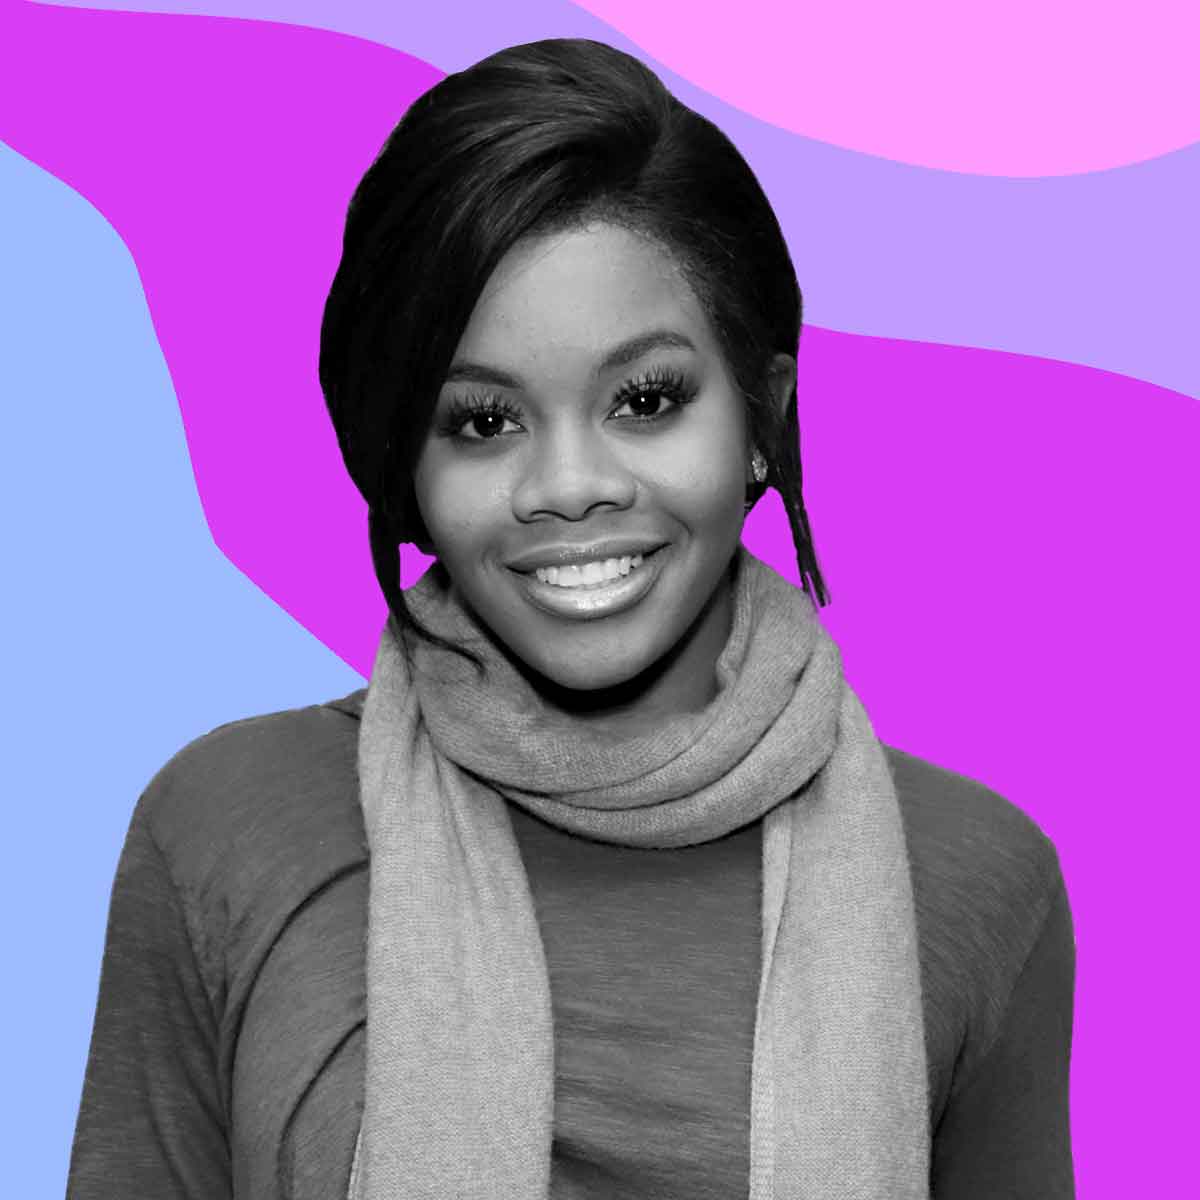 Gabby Douglas Apologizes for Saying Women Should Dress 'Modestly' in Response to Post About Sexual Assault
